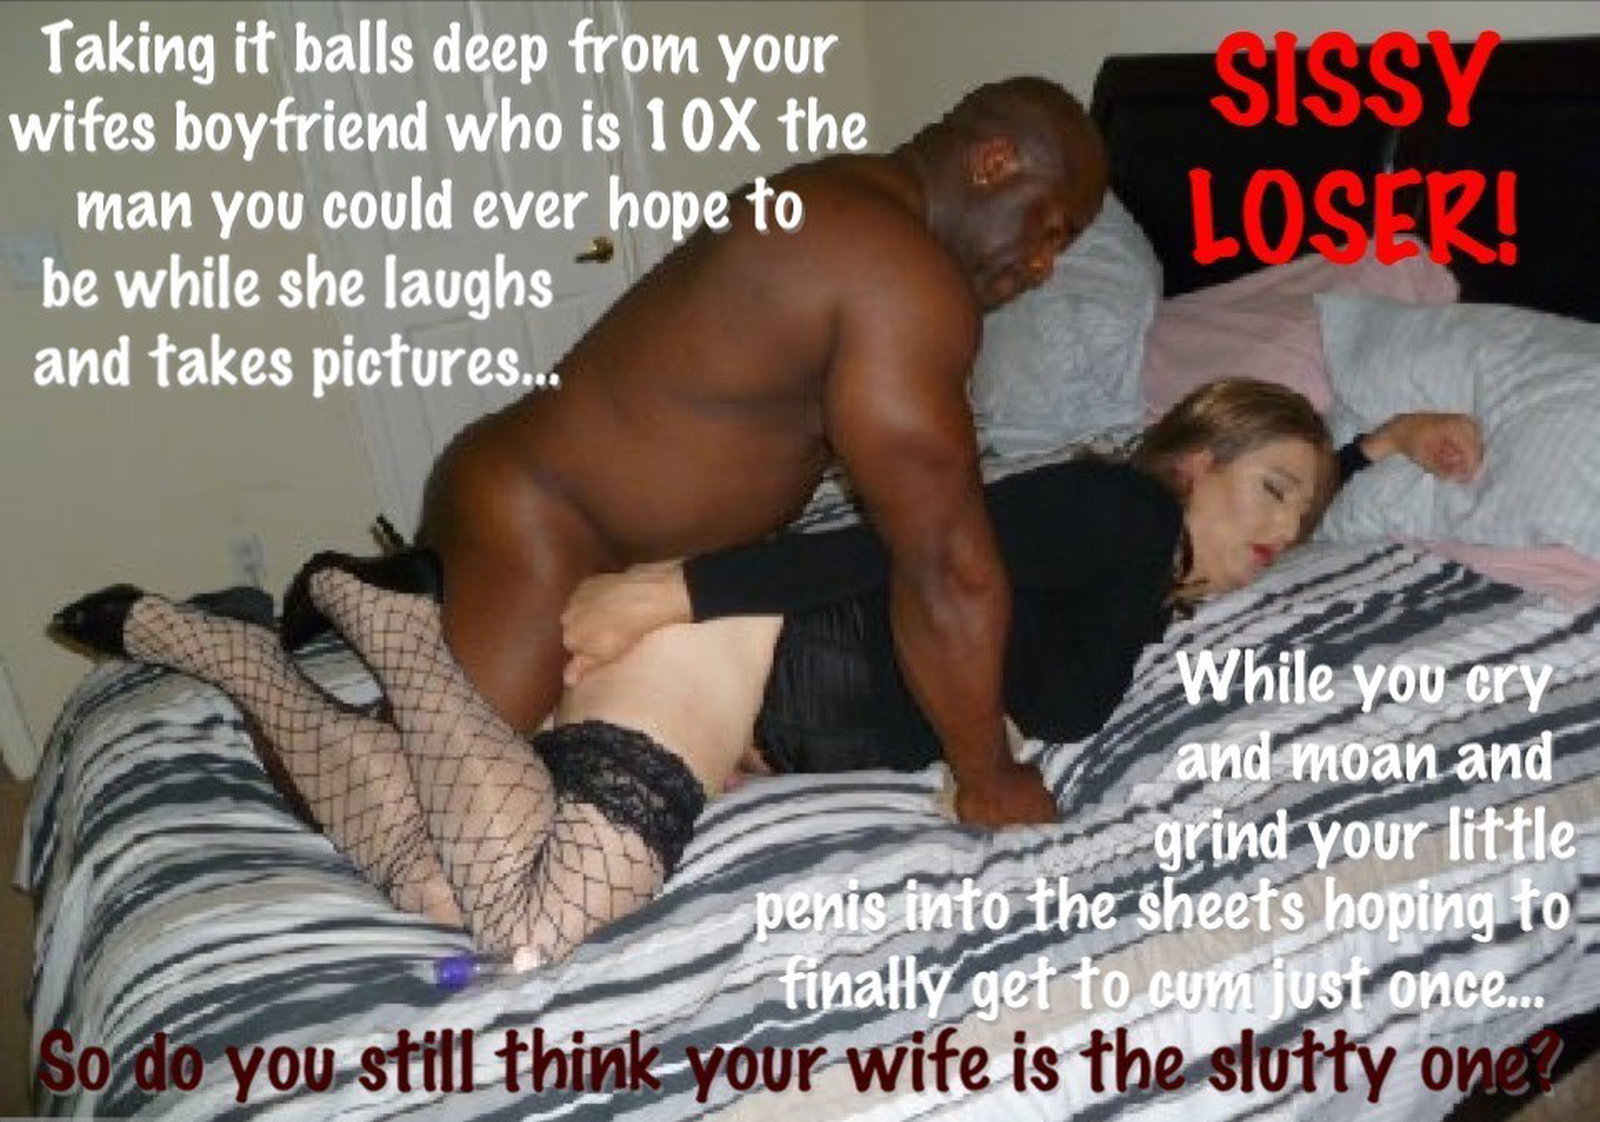 Watch the Photo by sissy whiteboy 4 BBC with the username @Sissywhiteboy4bbc, who is a verified user, posted on September 2, 2015 and the text says 'sissyhusbandfantasies:

Release your inner whore!


I love to be slutty!'